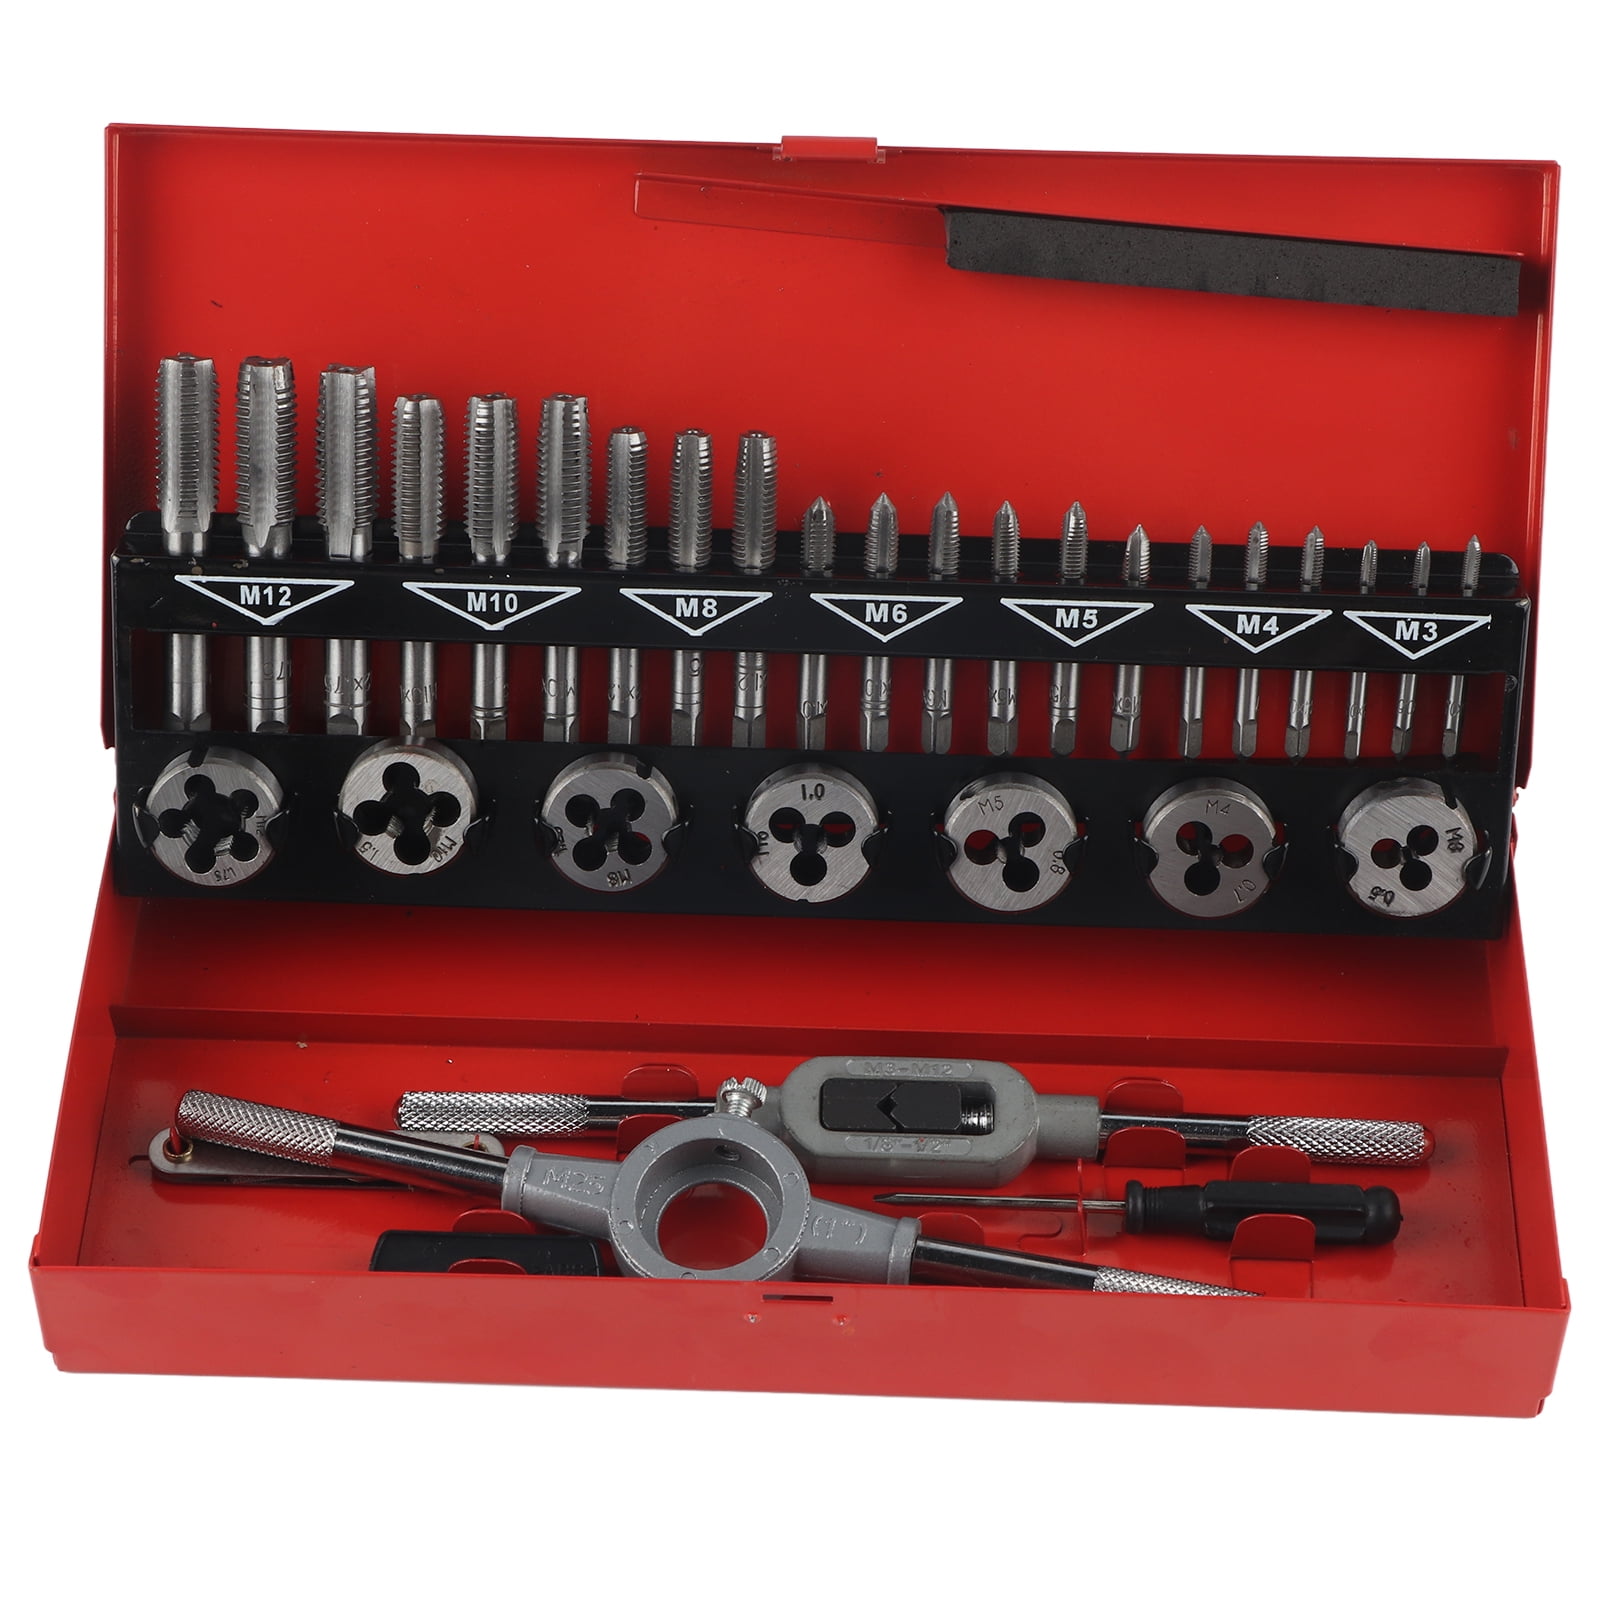 Threaded Tap and Die Set Bearing Steel M1-M25 Die High Precision 32Pcs M3-M12 Tap for Threading 